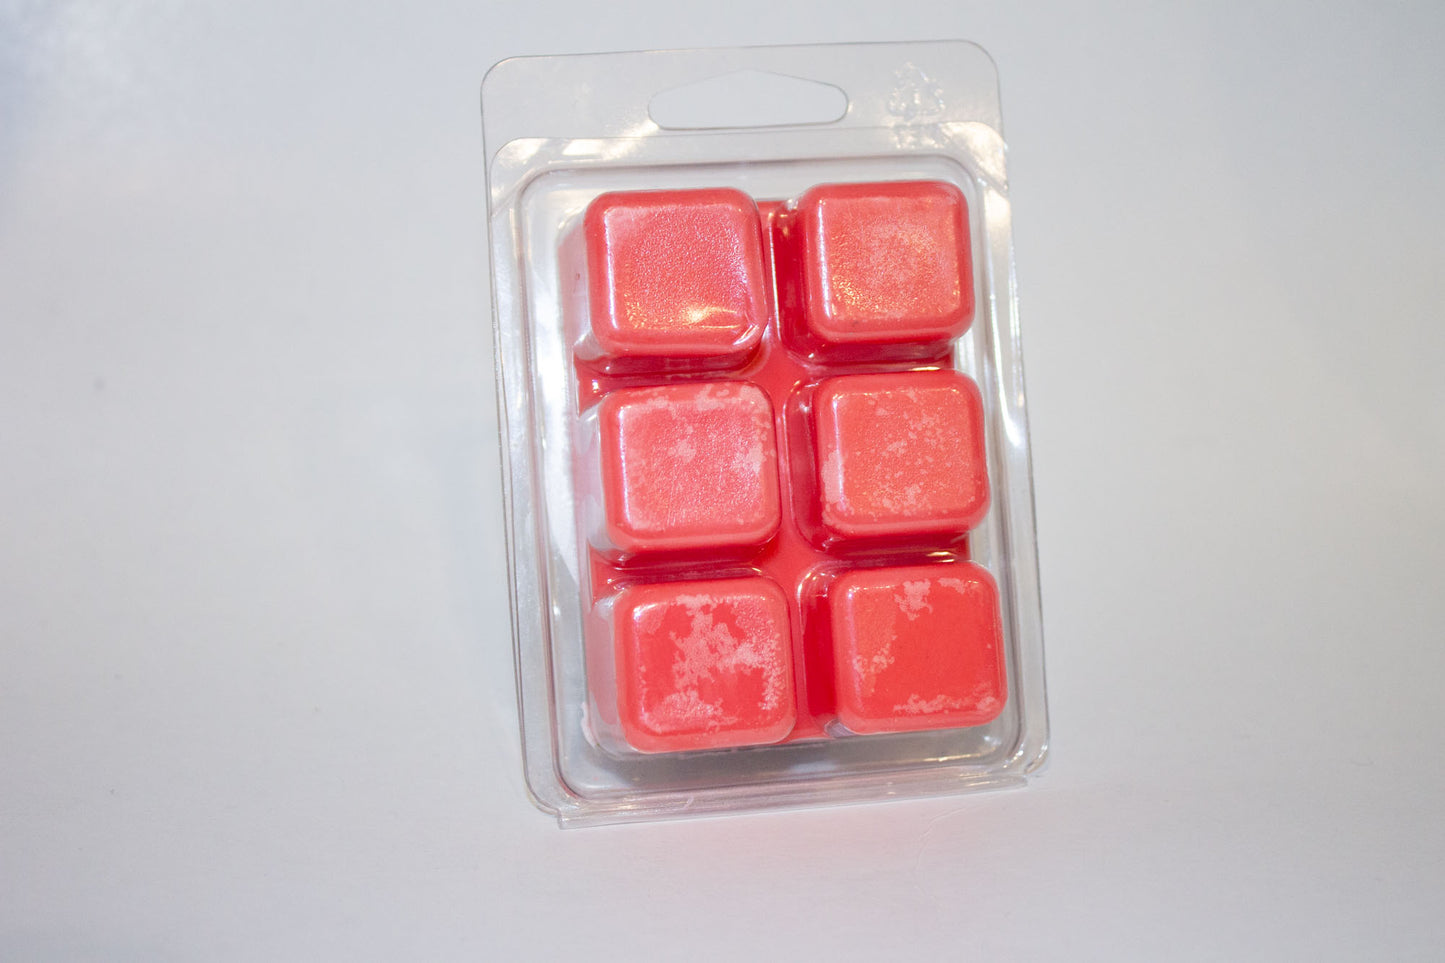 Red Leather - 2.5oz Soy melt cubes